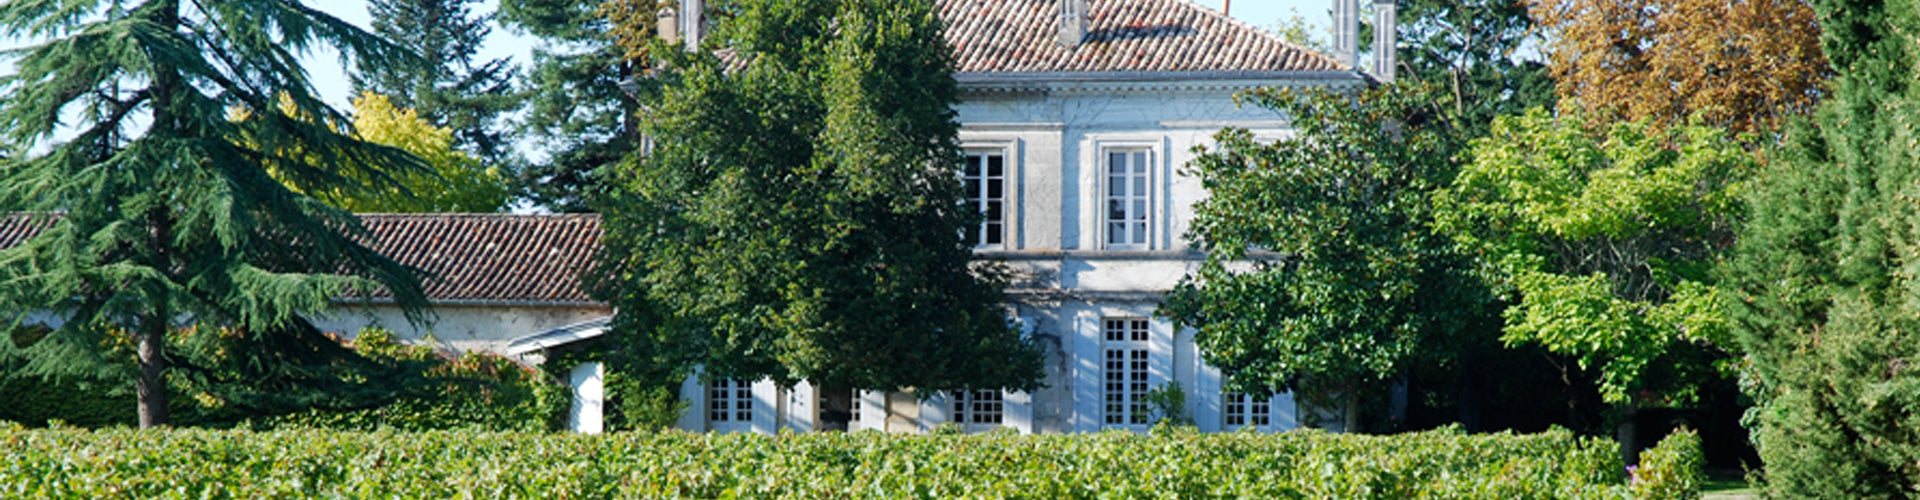 The Château Dutruch Grand Poujeaux with vineyards to the front